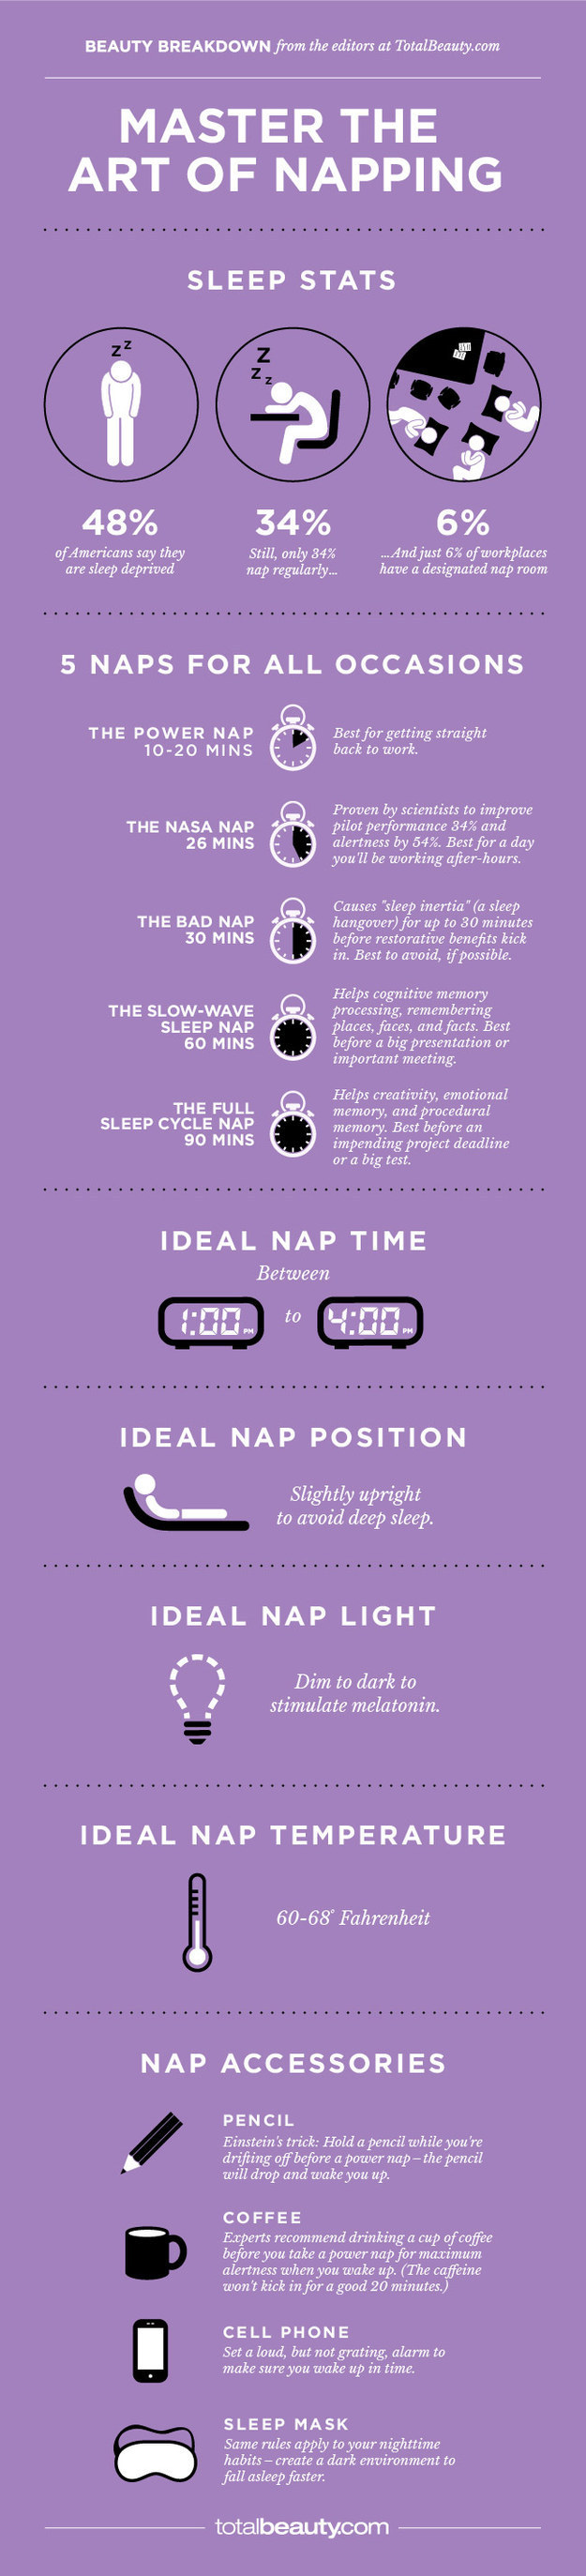 AD-Charts-That-Will-Help-You-Sleep-Better-12